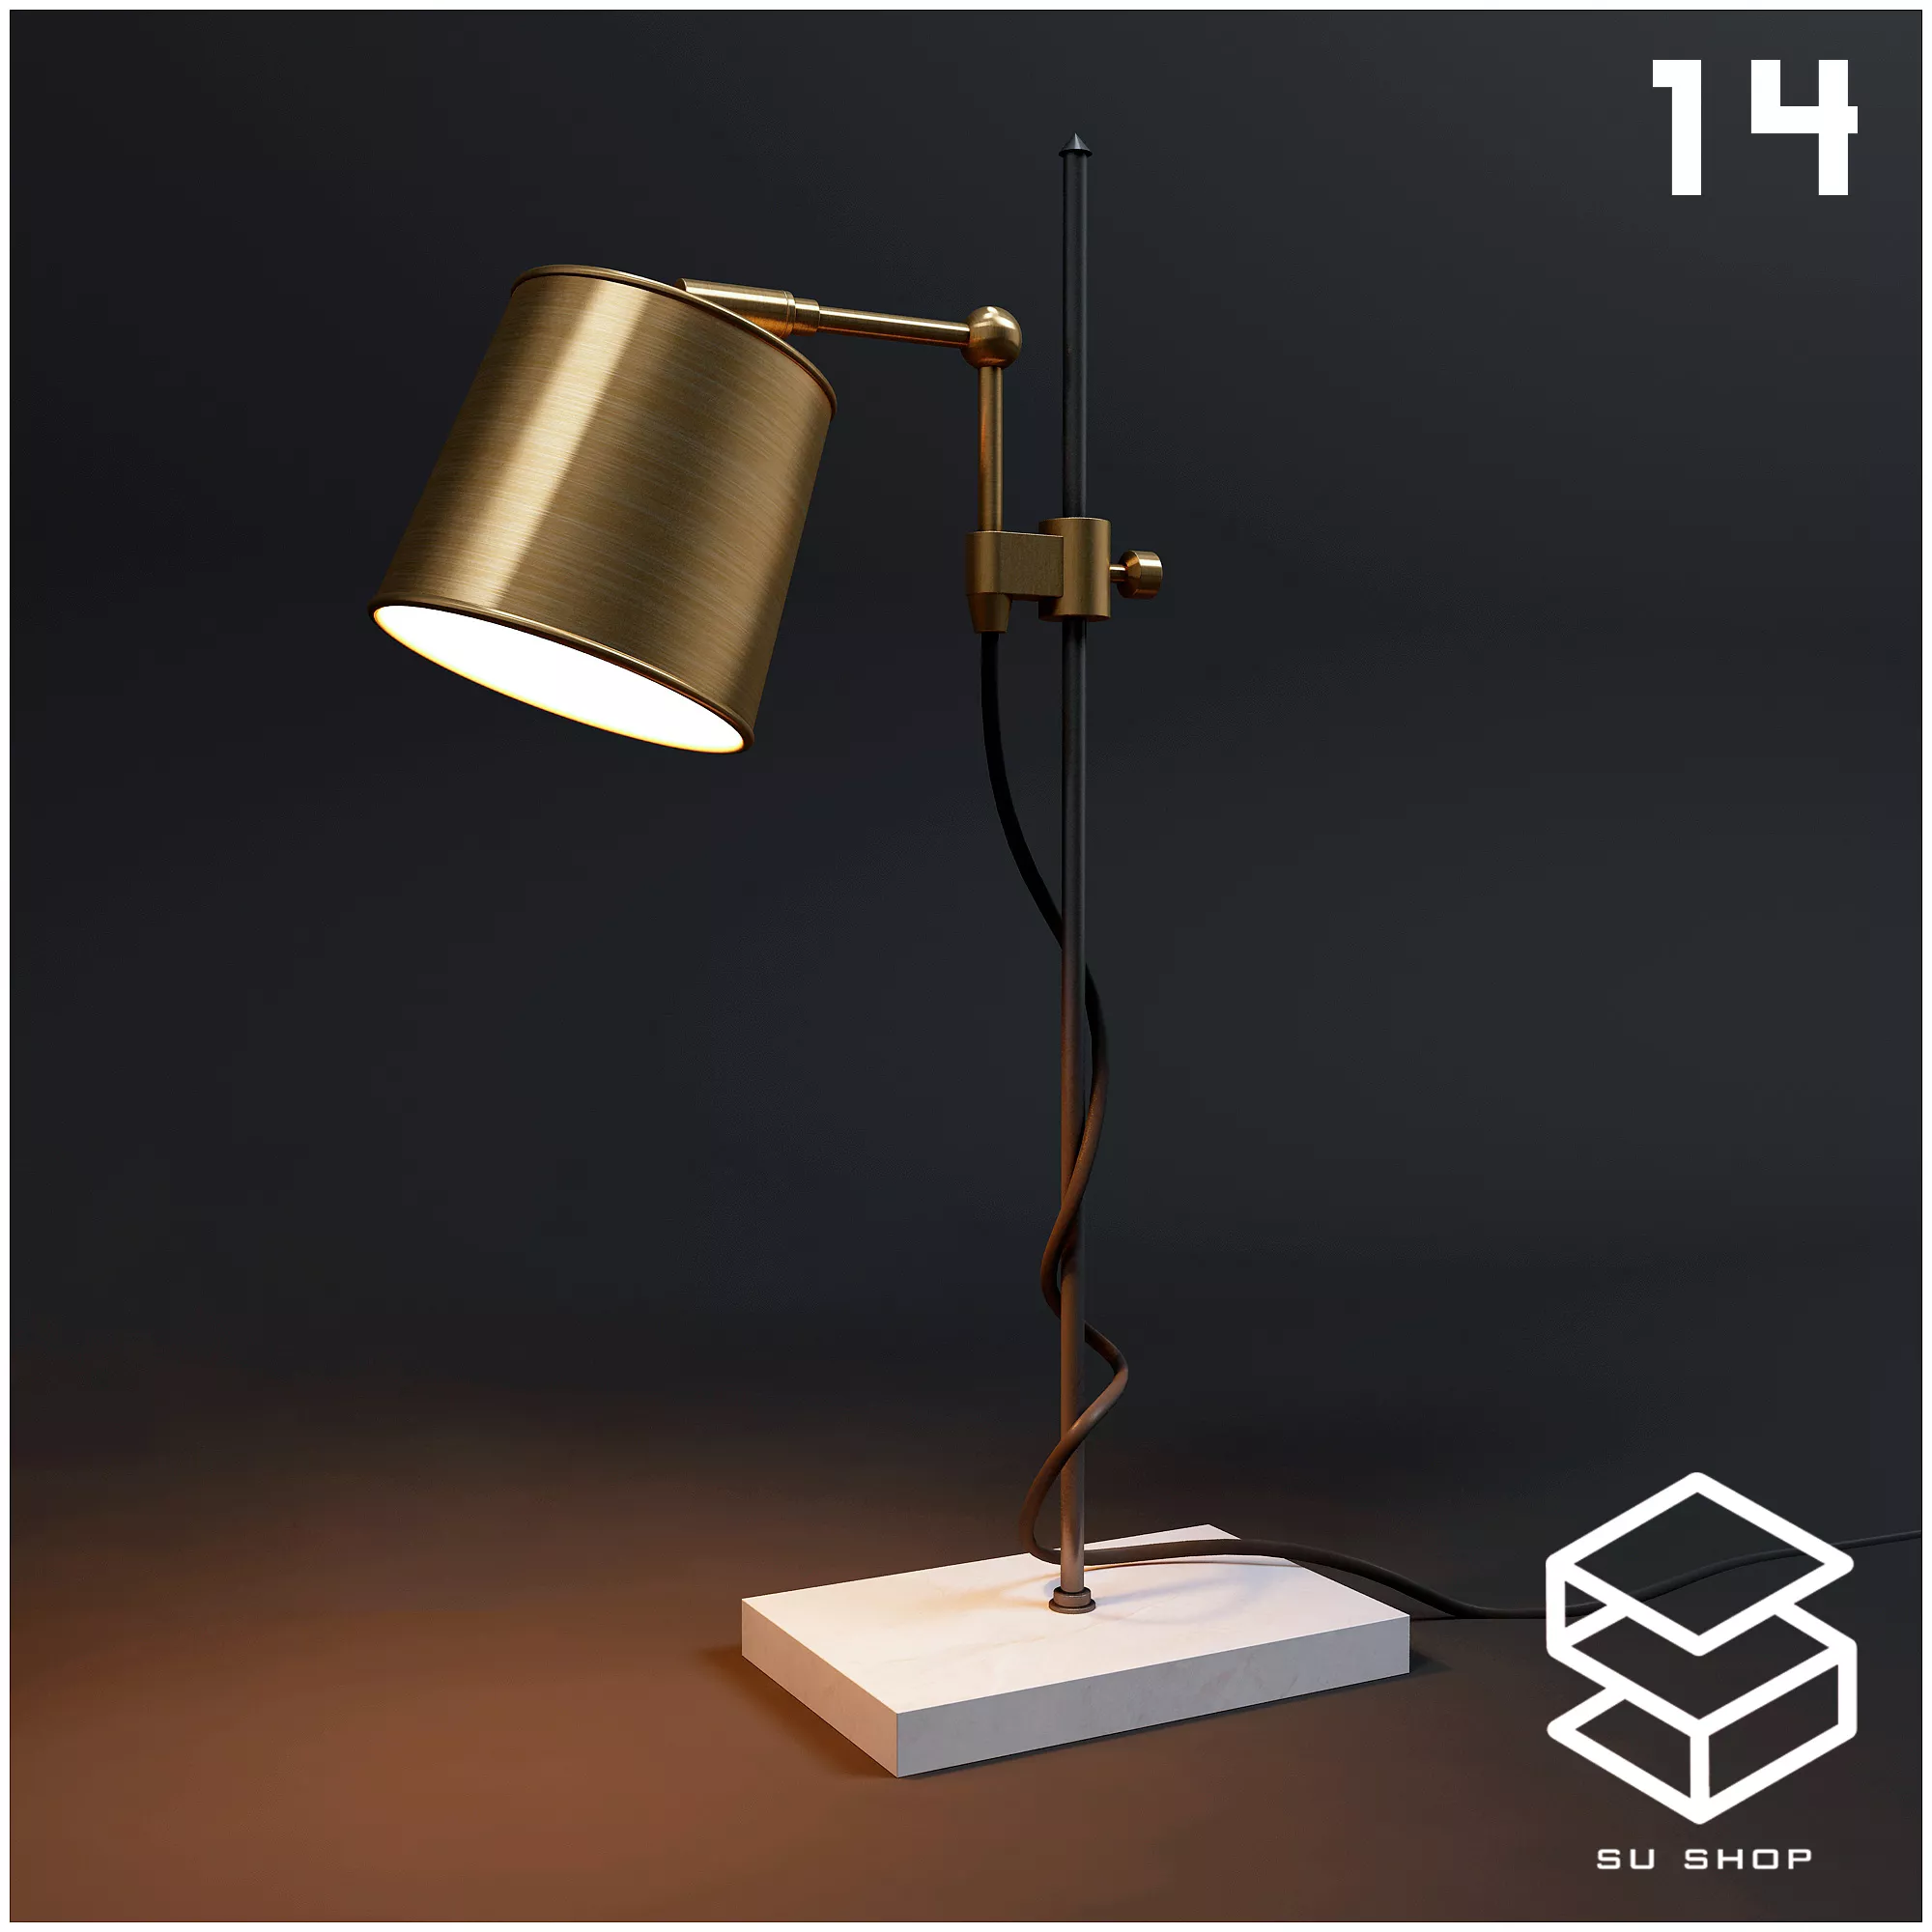 MODERN TABLE LAMP - SKETCHUP 3D MODEL - VRAY OR ENSCAPE - ID14708